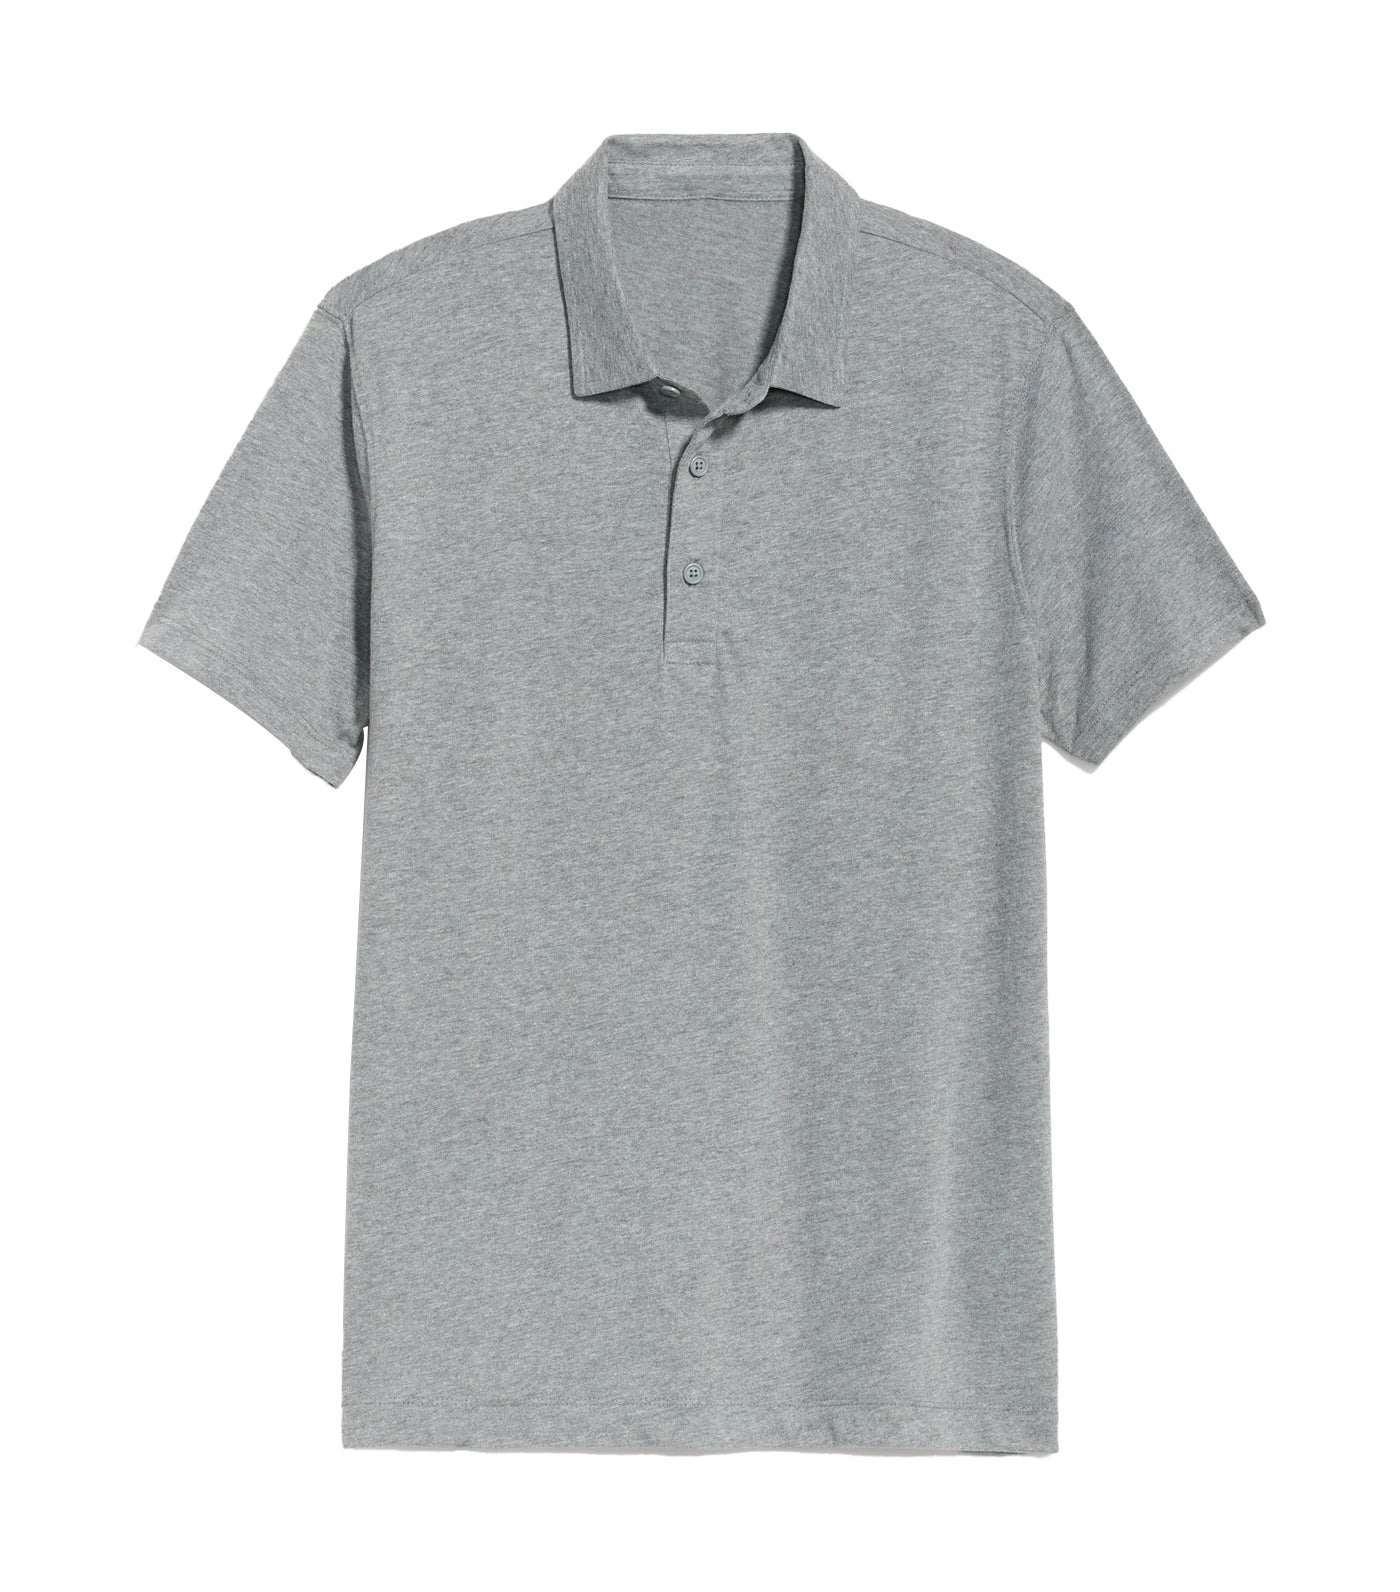 Soft-Washed Short Sleeve Polo Shirt for Men B25